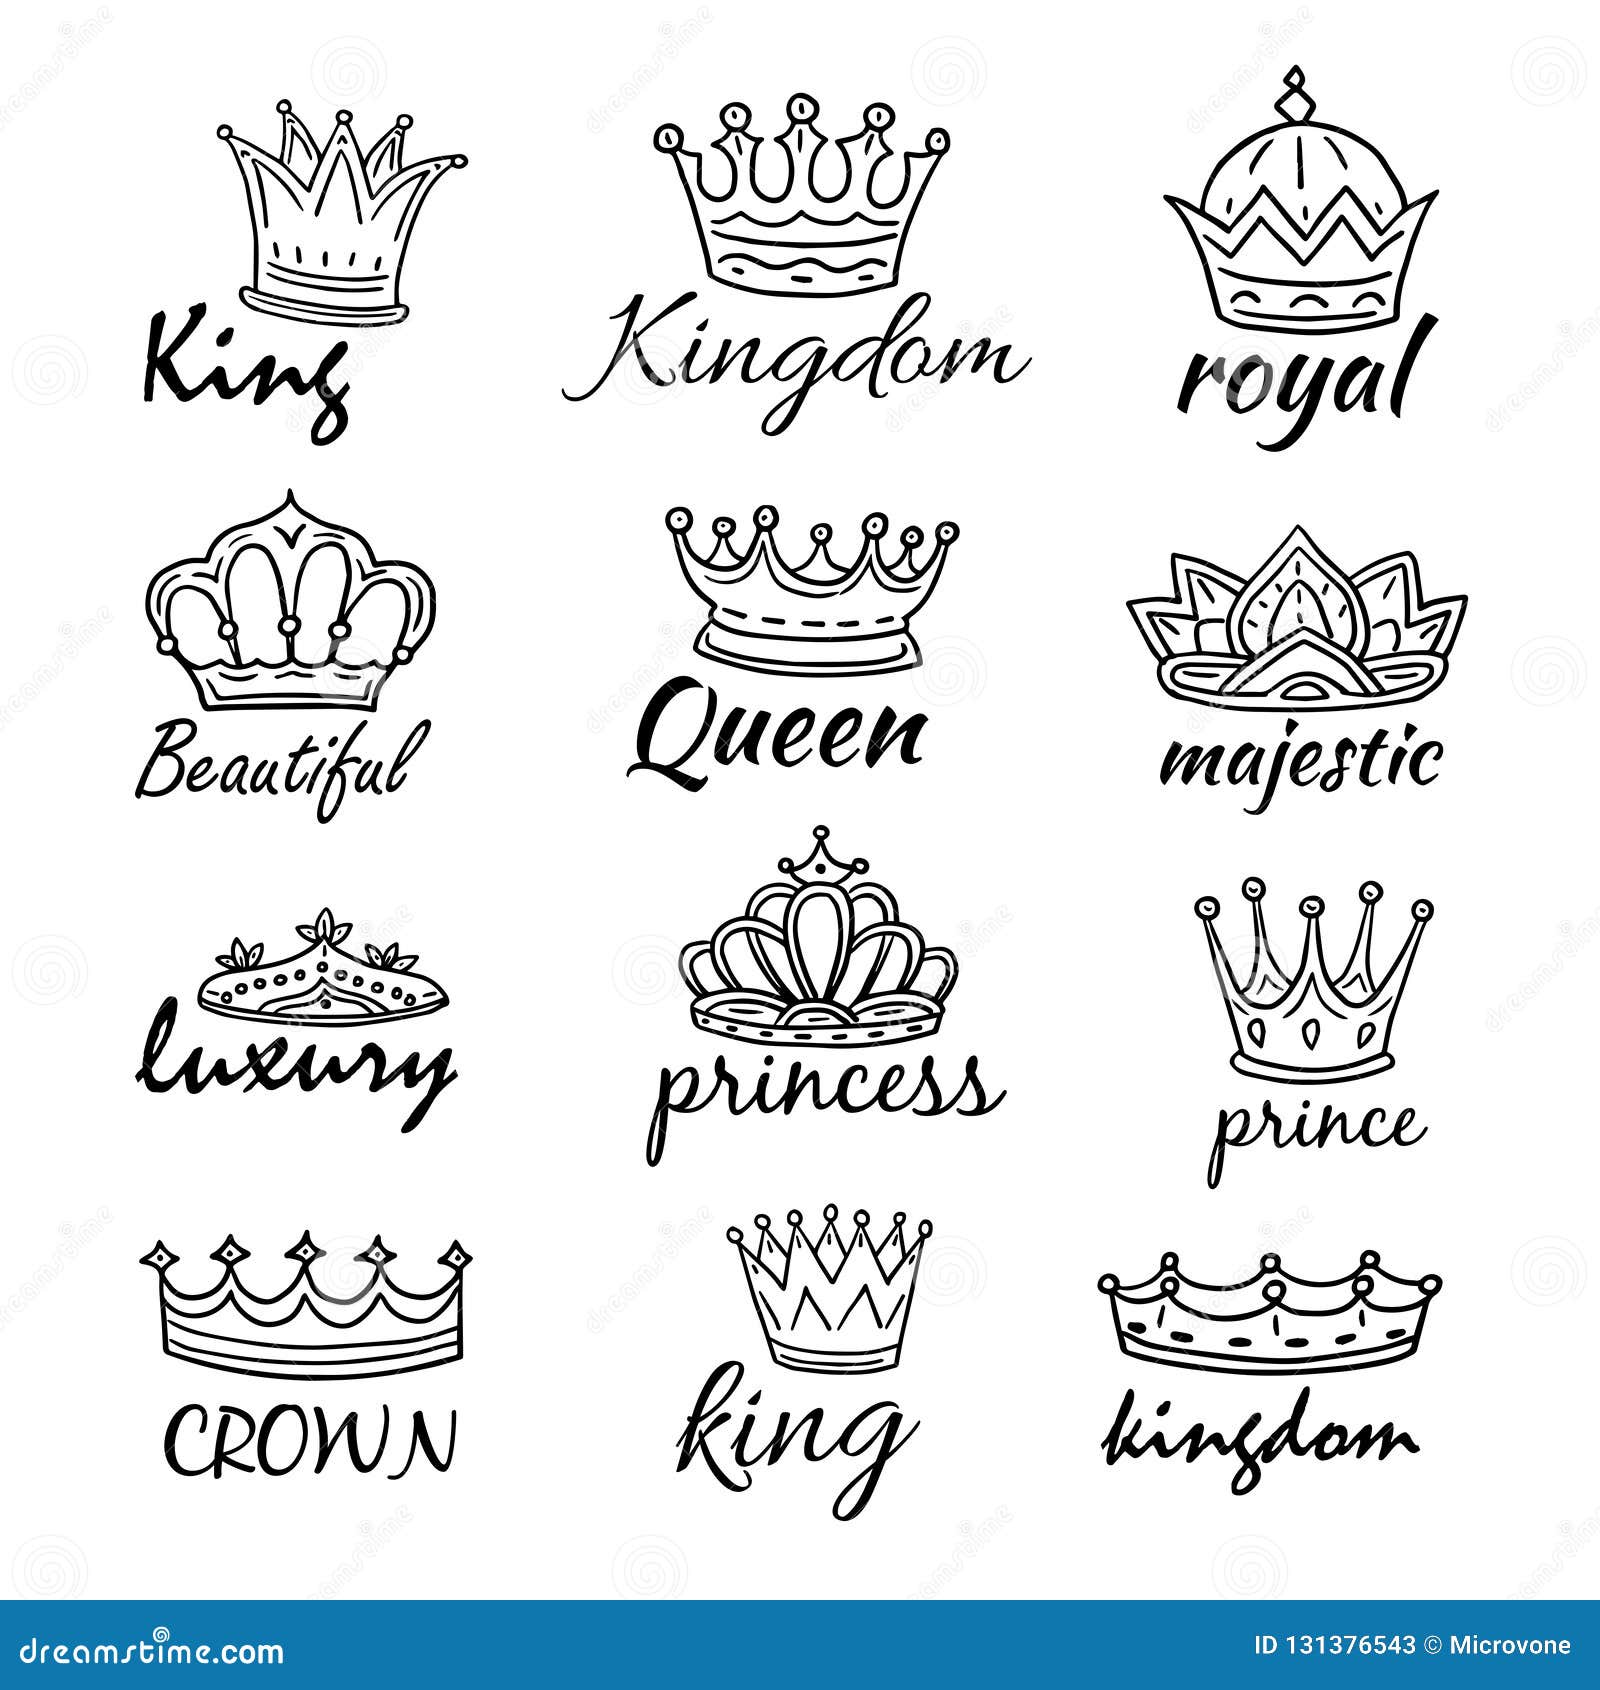 Sketch Crowns Hand Drawn King Queen Crown And Princess Tiara Royalty Vector Doodle Symbols And Majestic Logos Stock Vector Illustration Of Fashion Graphic